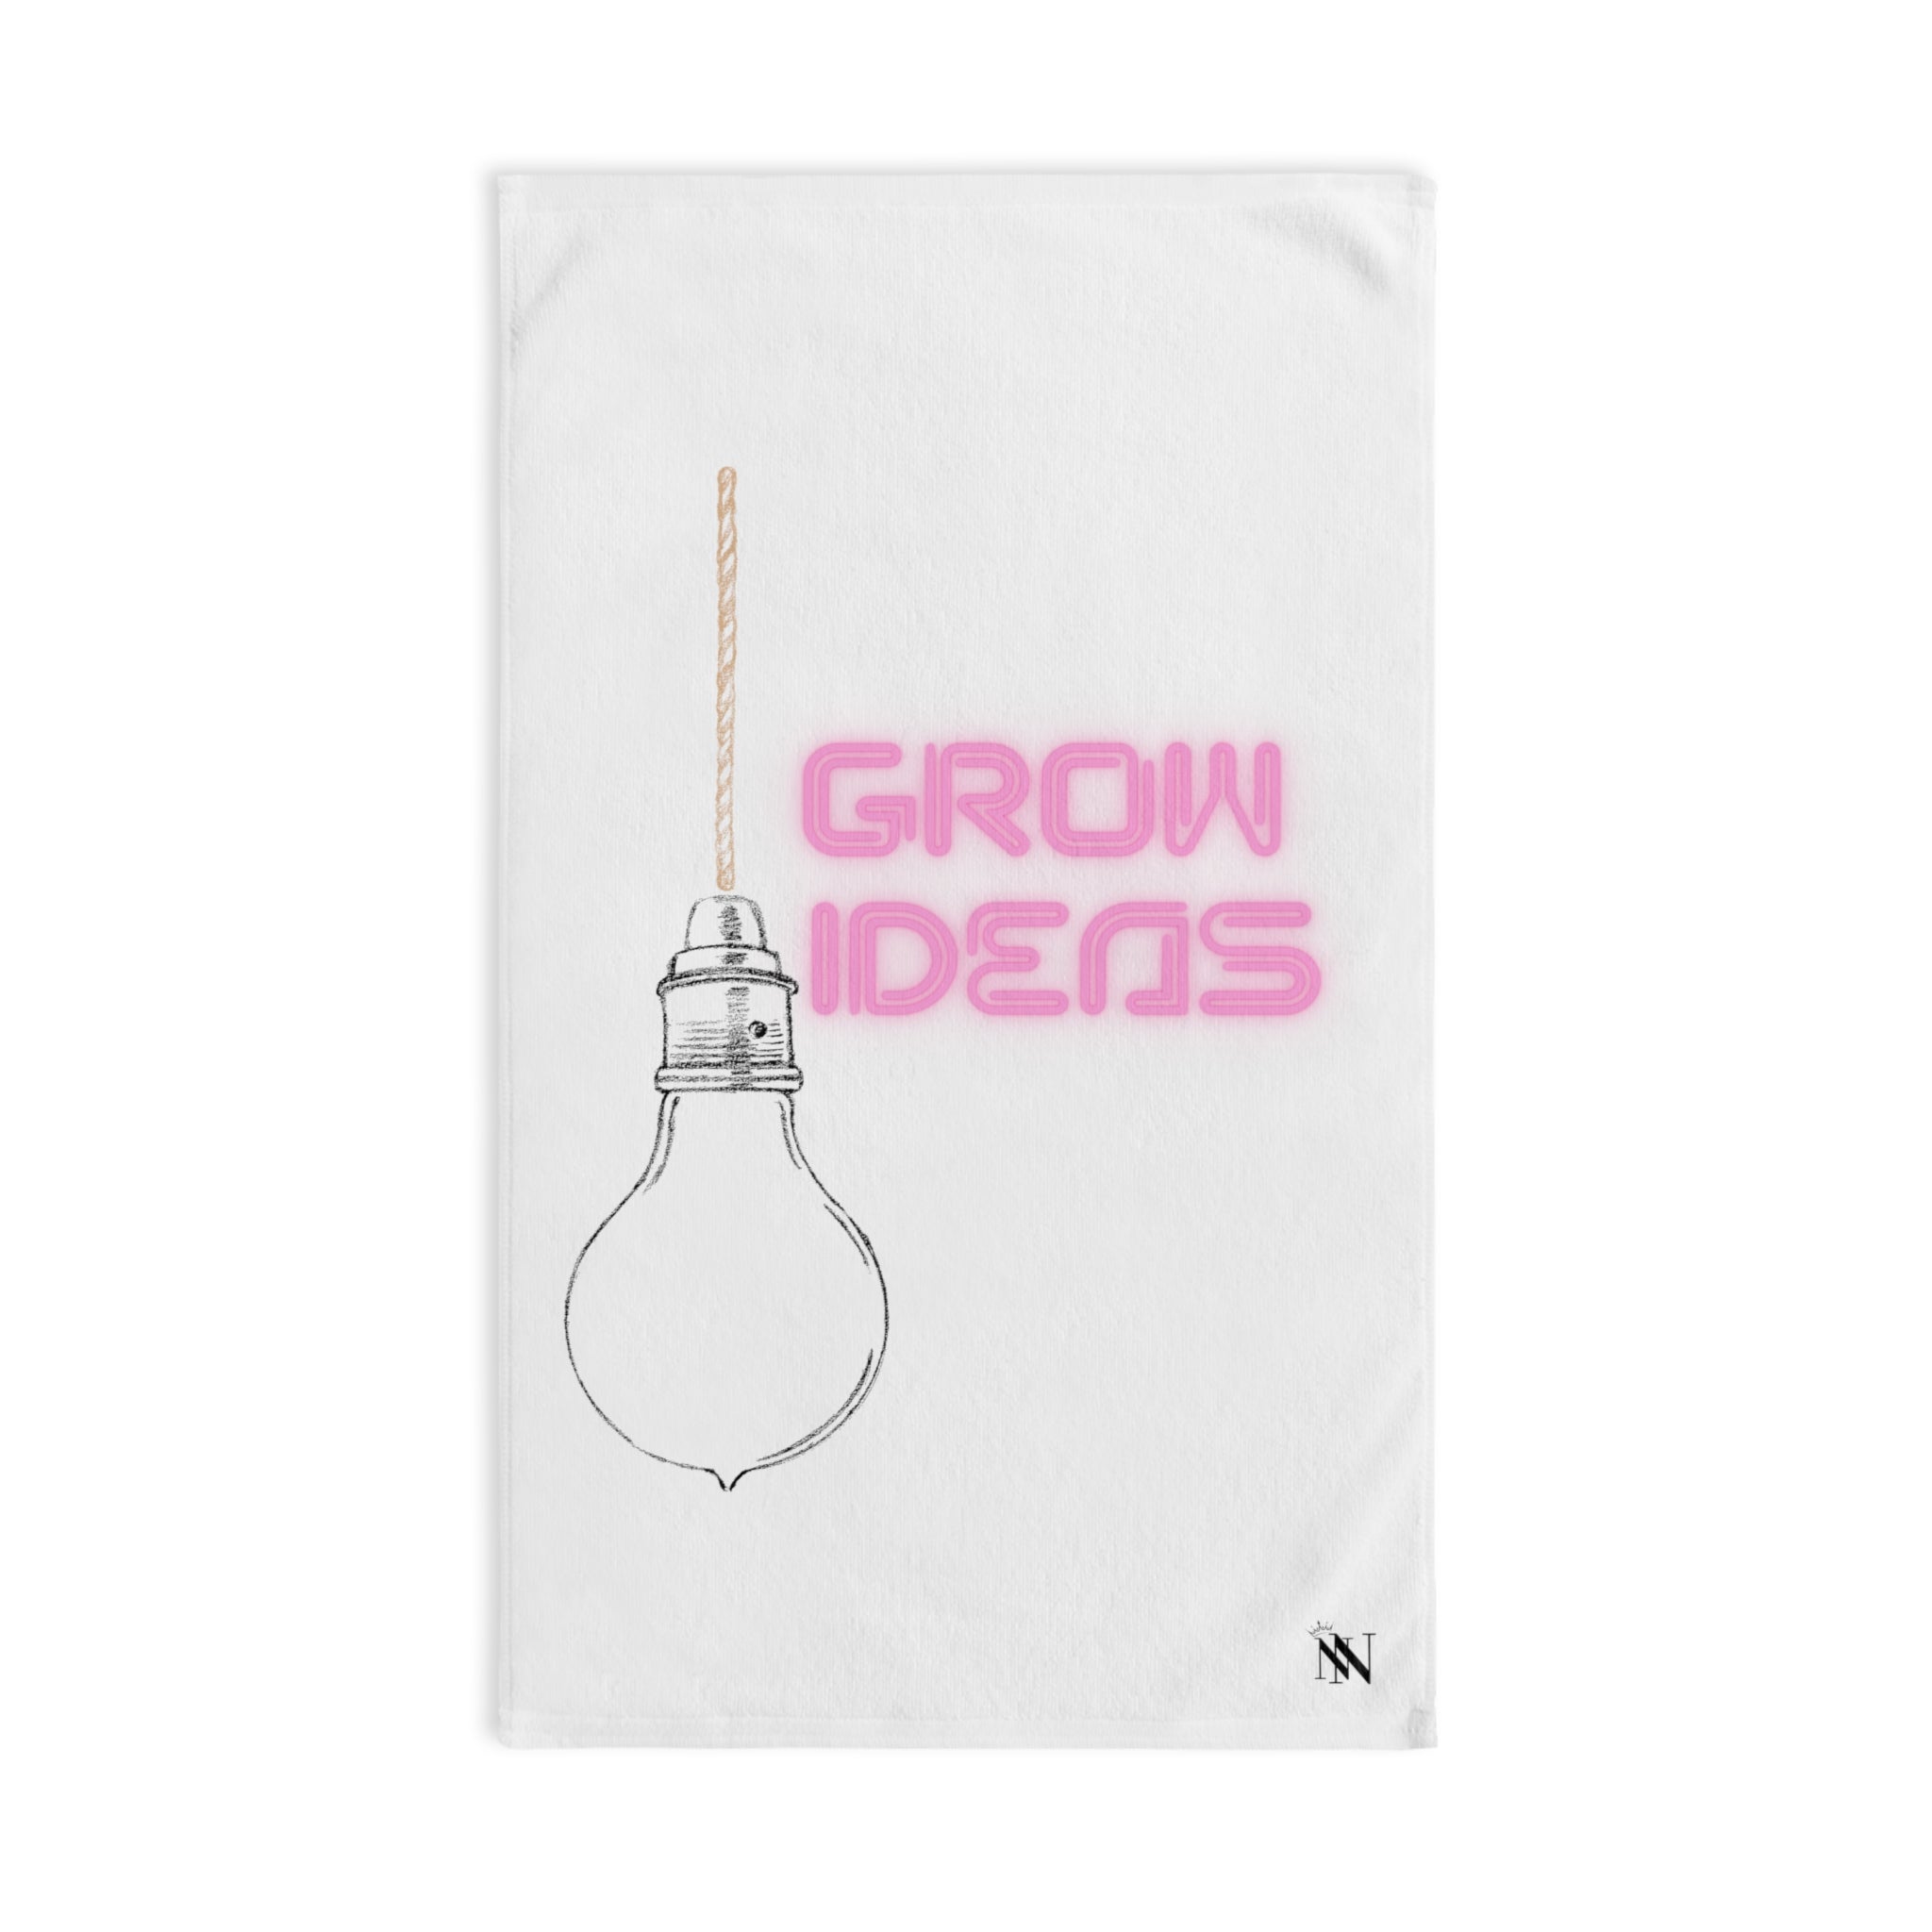 Grow Ideas White | Funny Gifts for Men - Gifts for Him - Birthday Gifts for Men, Him, Her, Husband, Boyfriend, Girlfriend, New Couple Gifts, Fathers & Valentines Day Gifts, Christmas Gifts NECTAR NAPKINS